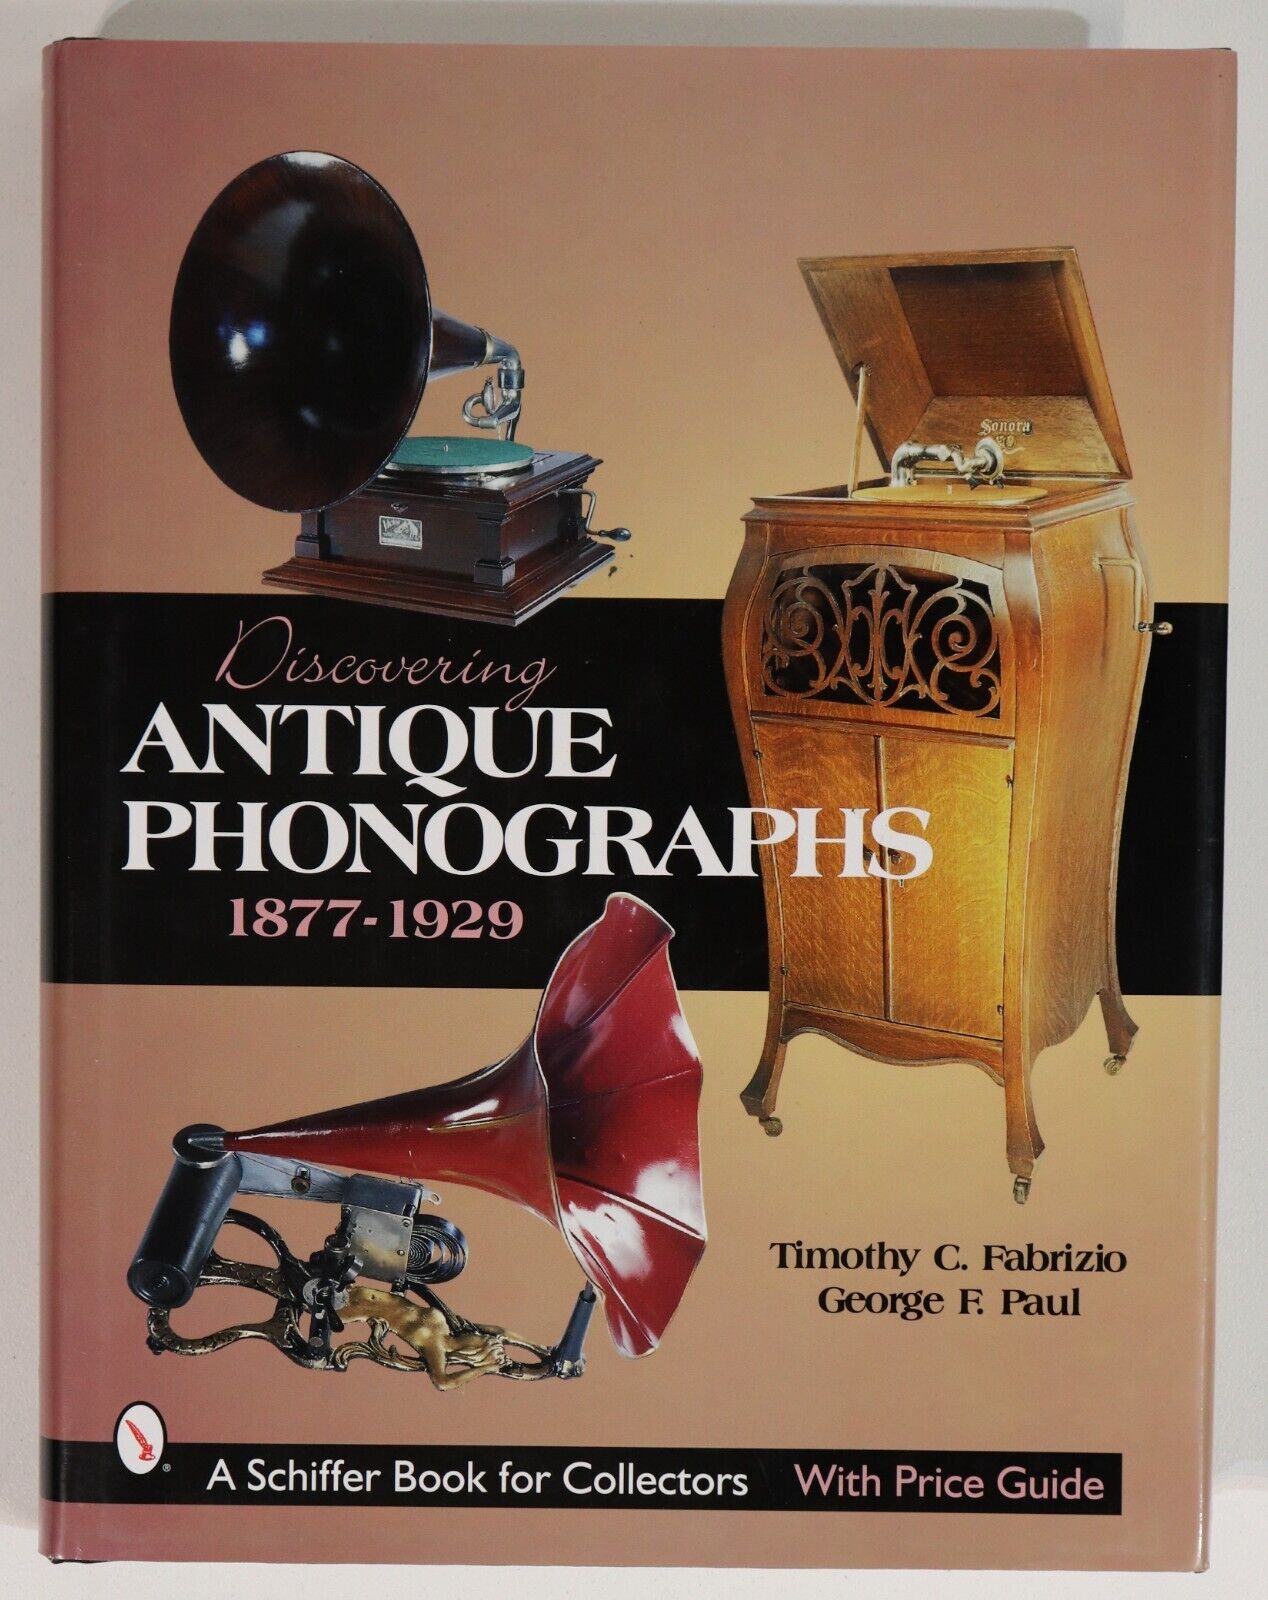 Discovering Antique Phonographs - 2000 - Music History Book